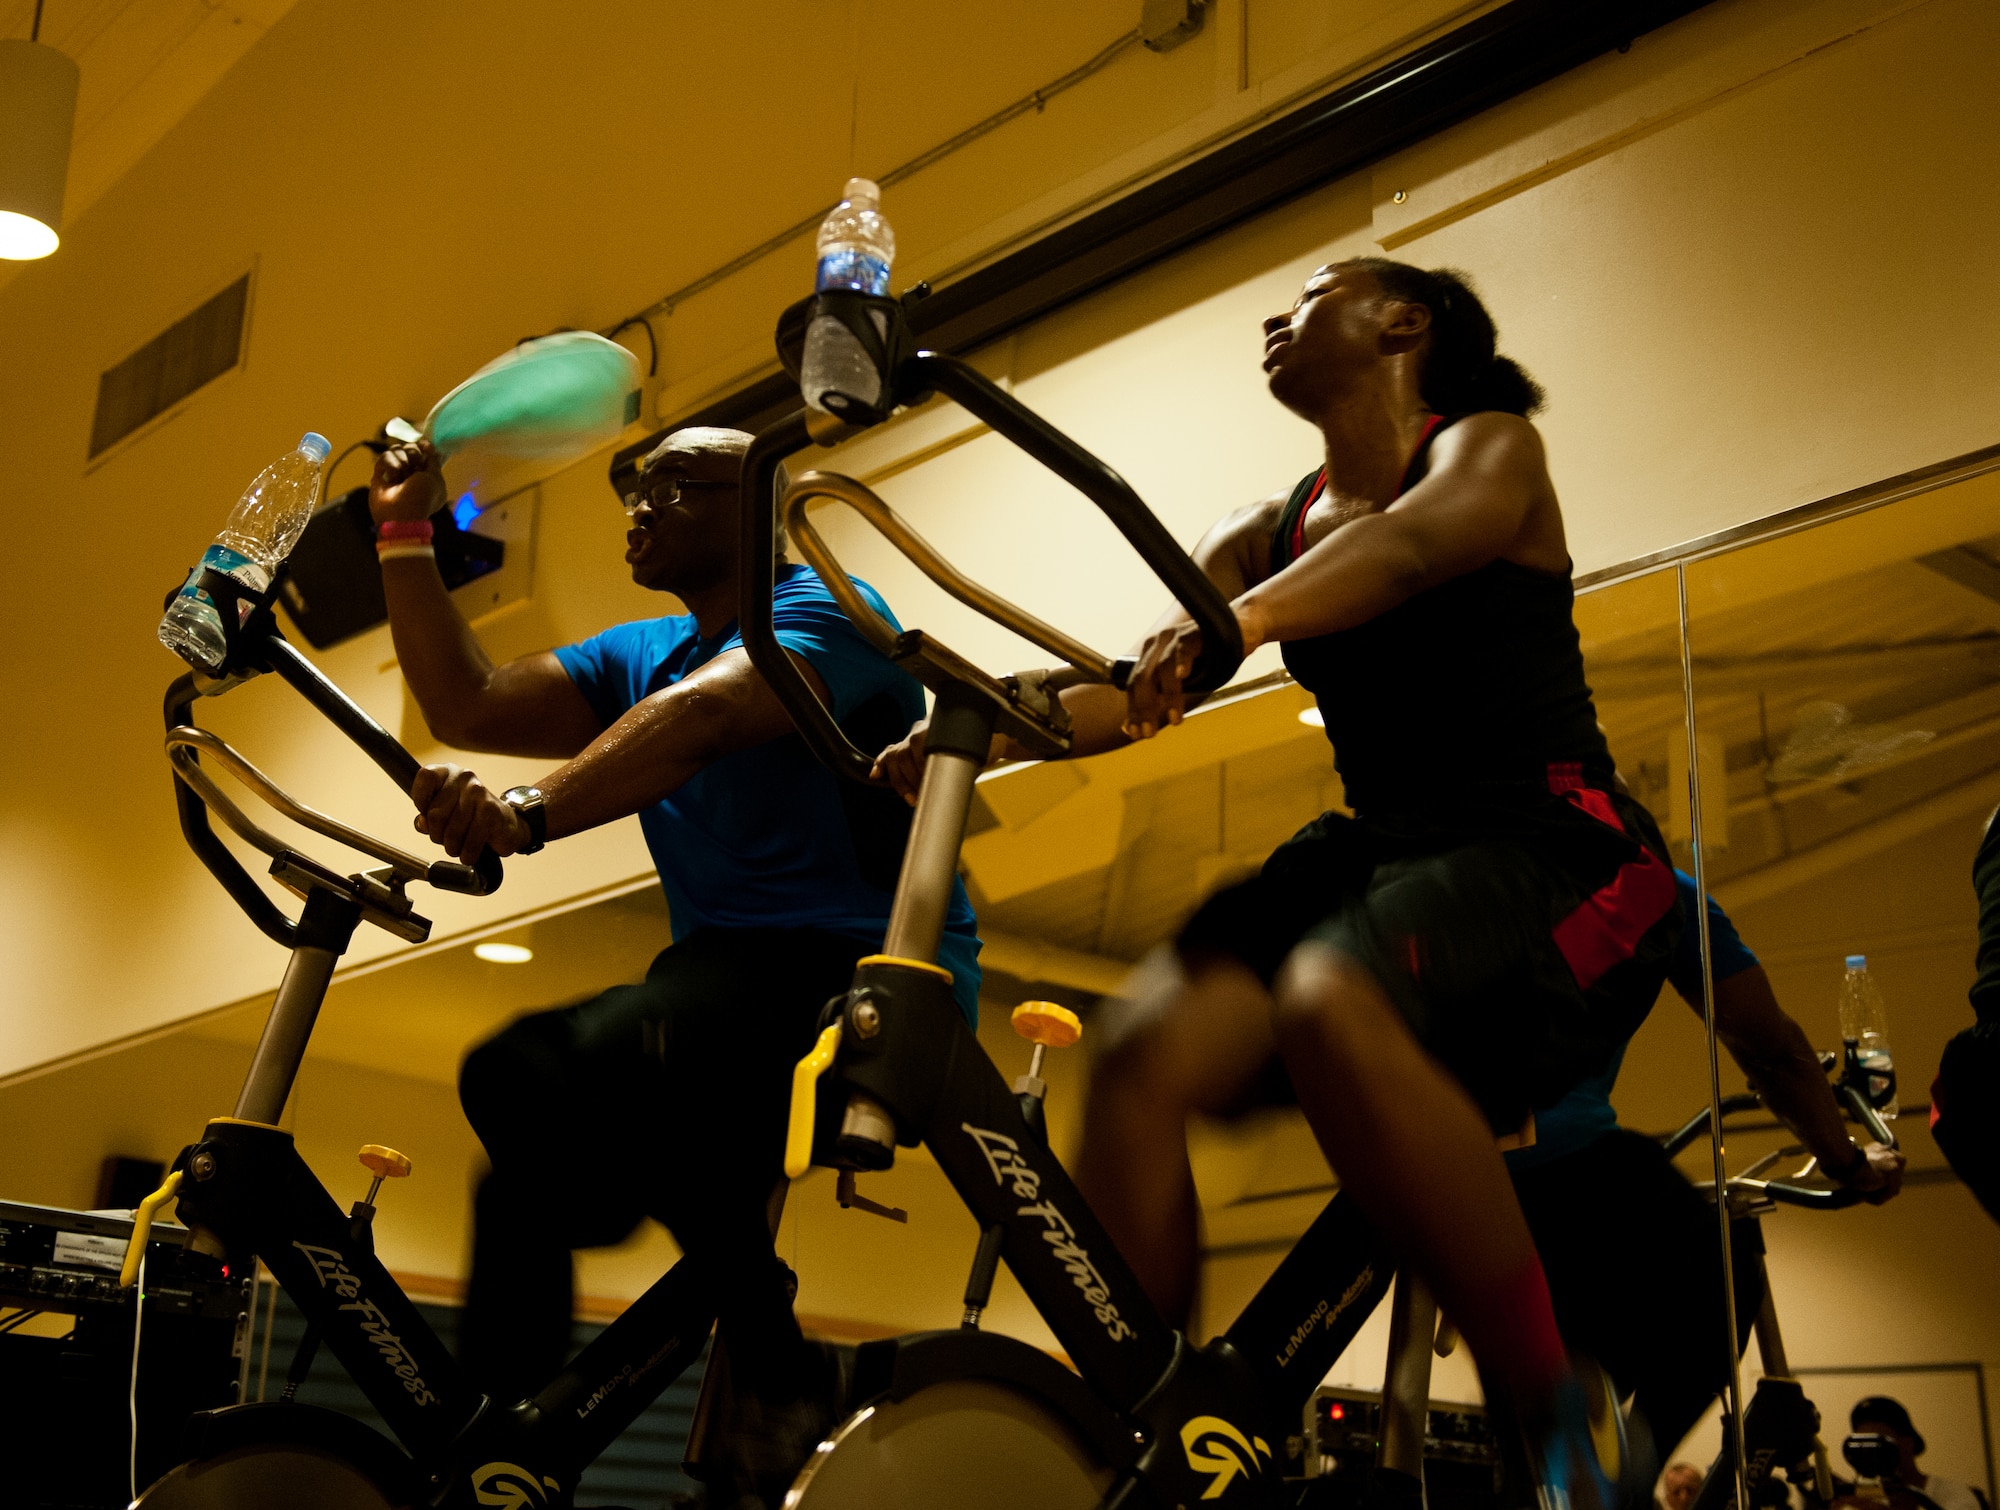 Master Sgt. Dante Brooks, 8th Operations Support Squadron host aviation resource management superintendent, and Staff Sgt. Siera Wilson, 8th Operations Group, lead a spin class at Kunsan Air Base, Republic of Korea, April 16, 2014. Spin class is offered four times a week at the Wolf Pack Fitness Center. (U.S. Air Force photo by Staff Sgt. Clayton Lenhardt/Released)